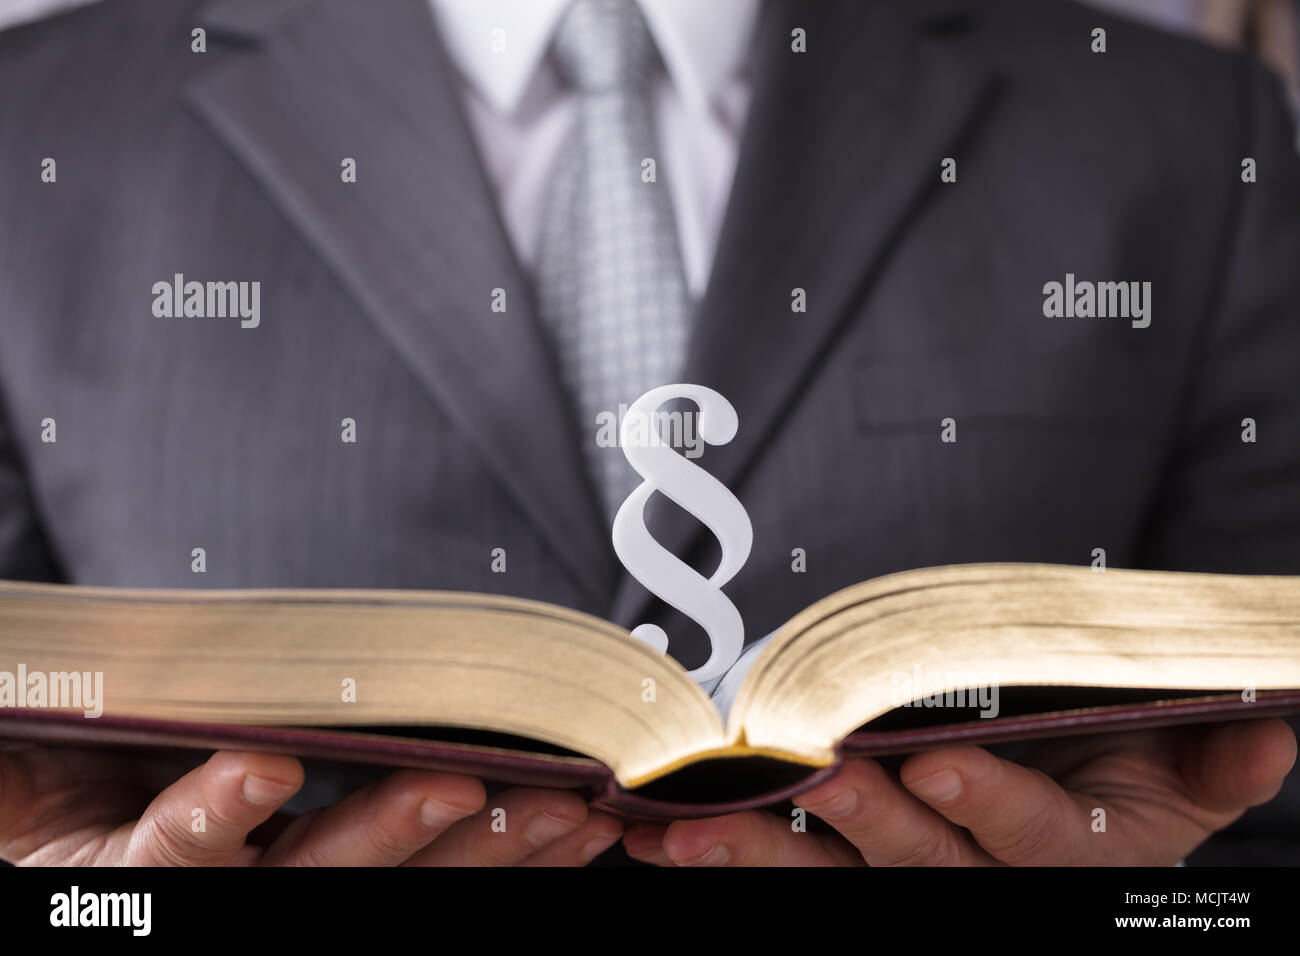 Close-up Of A Judge's Hand Holding Law Book With Paragraph Symbol Stock Photo